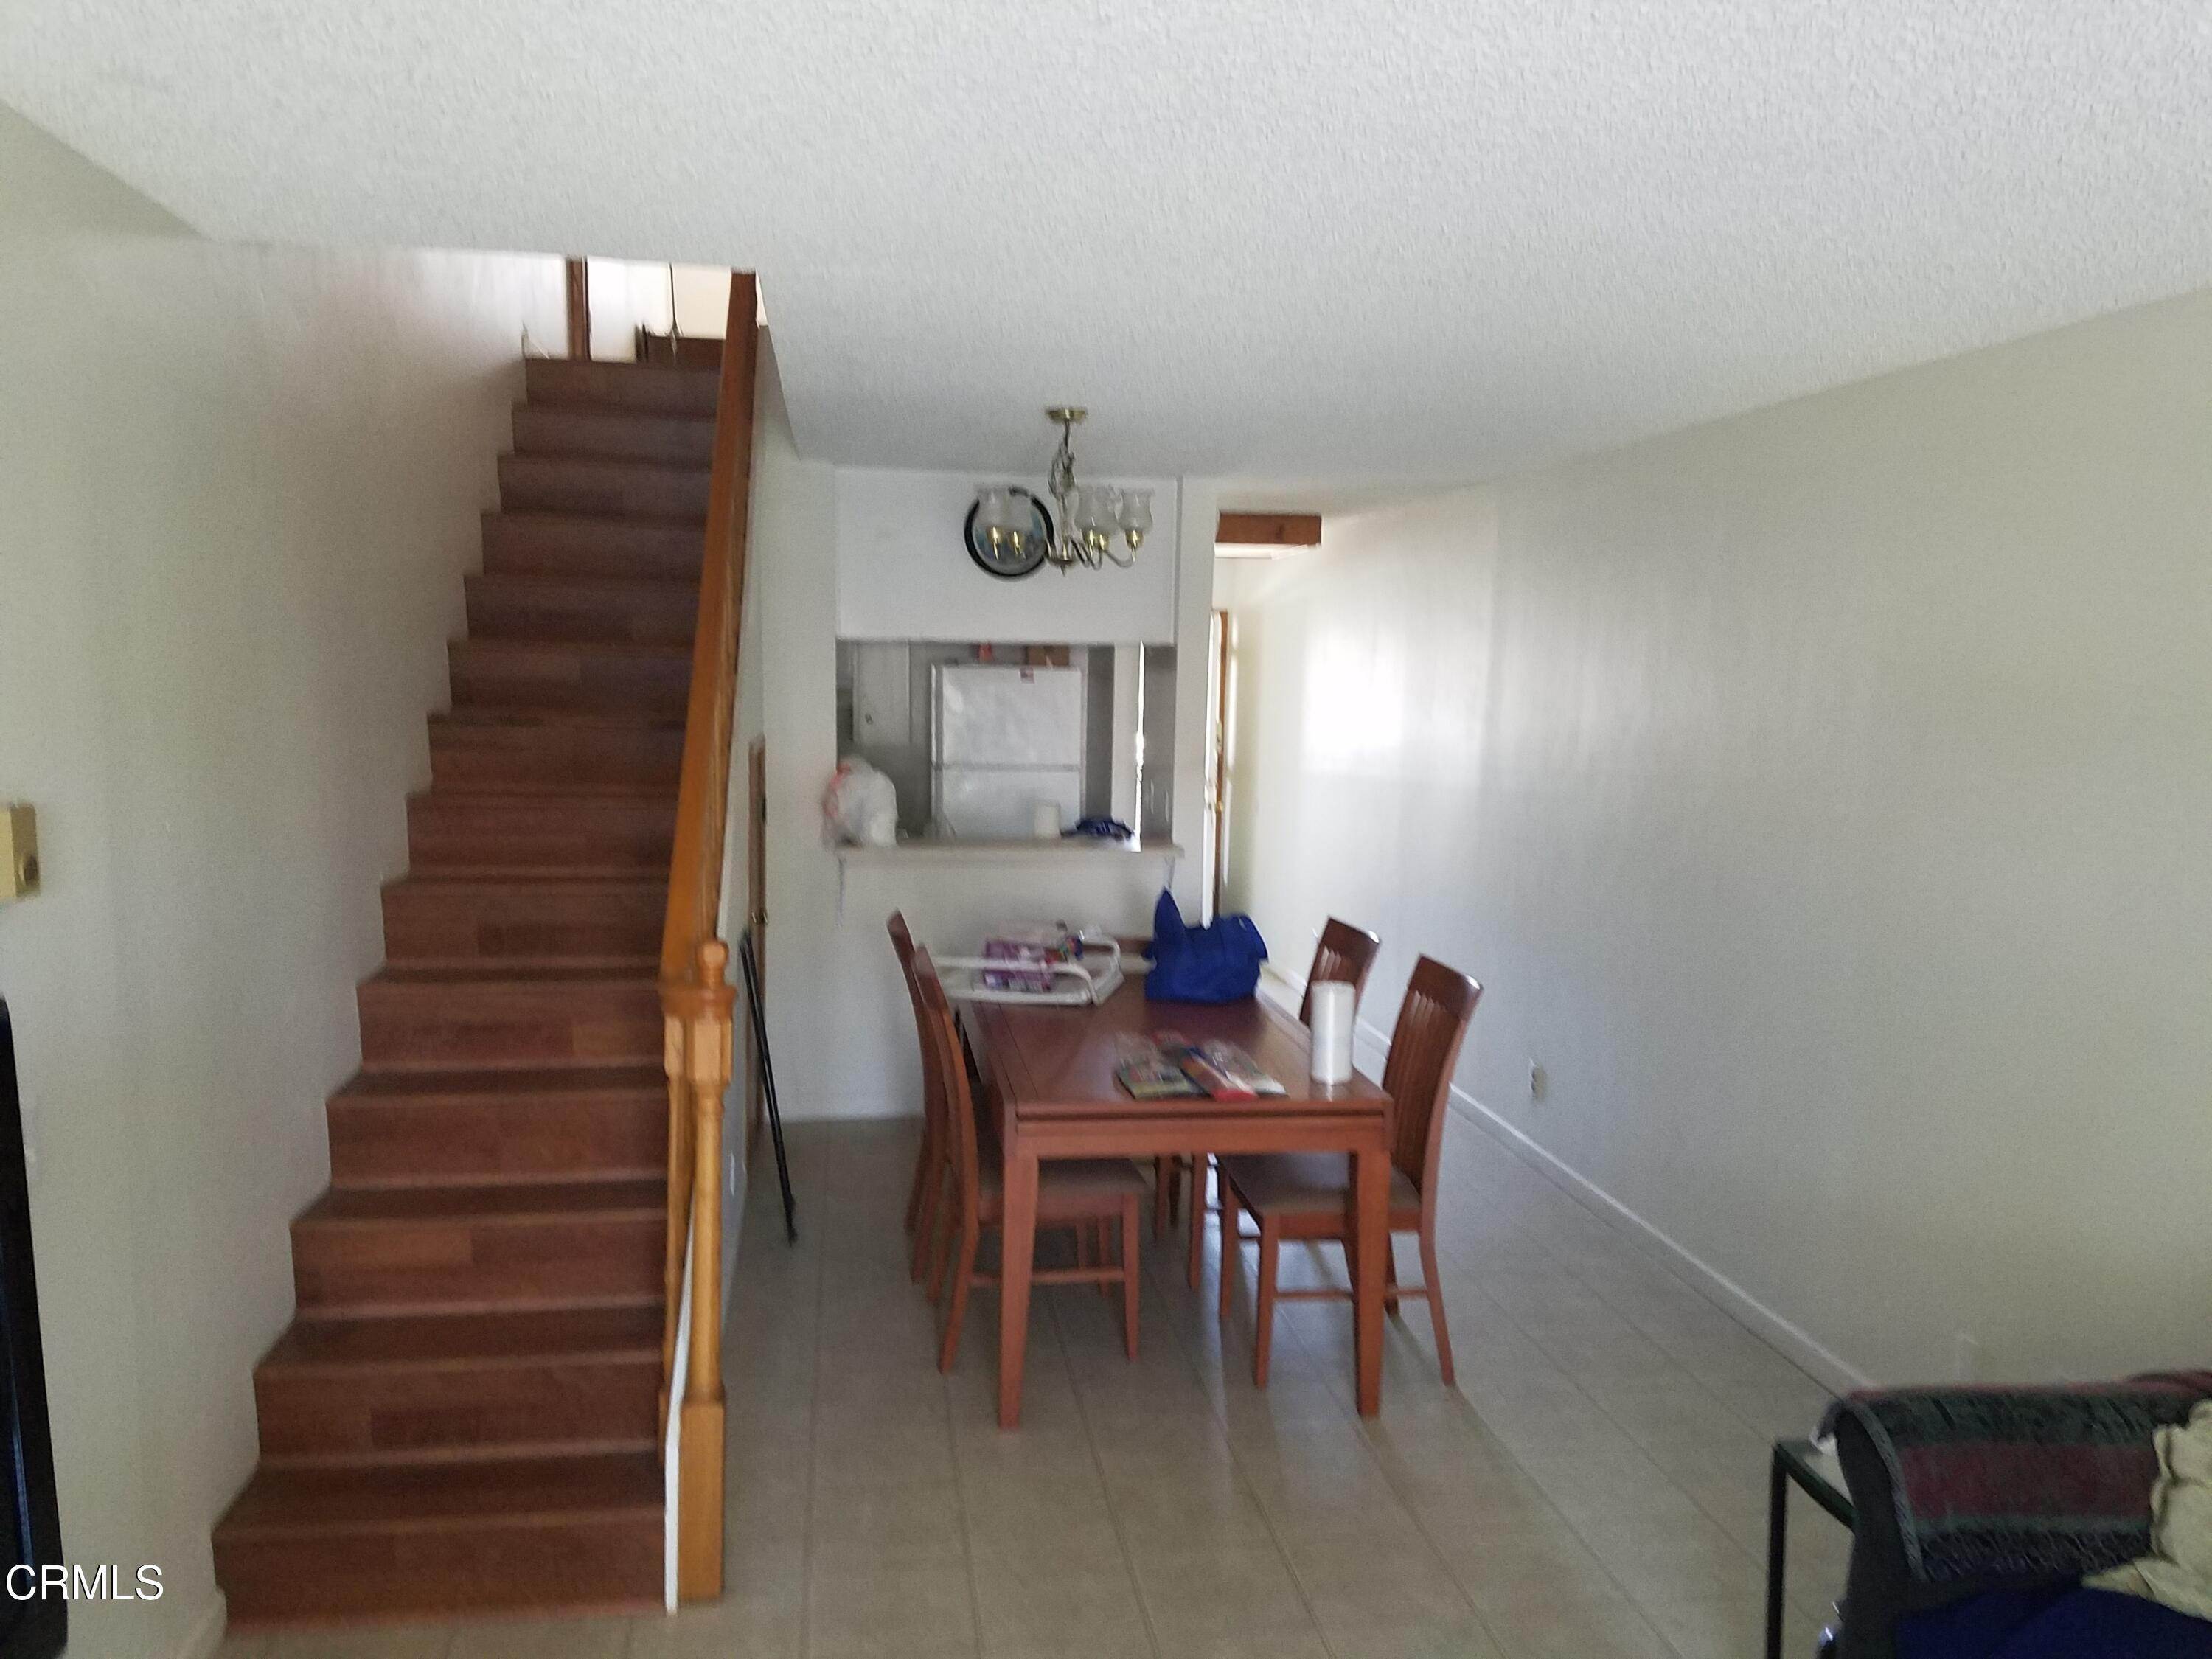 3. Condominiums for Sale at 391 East Surfside Drive Port Hueneme, California 93041 United States